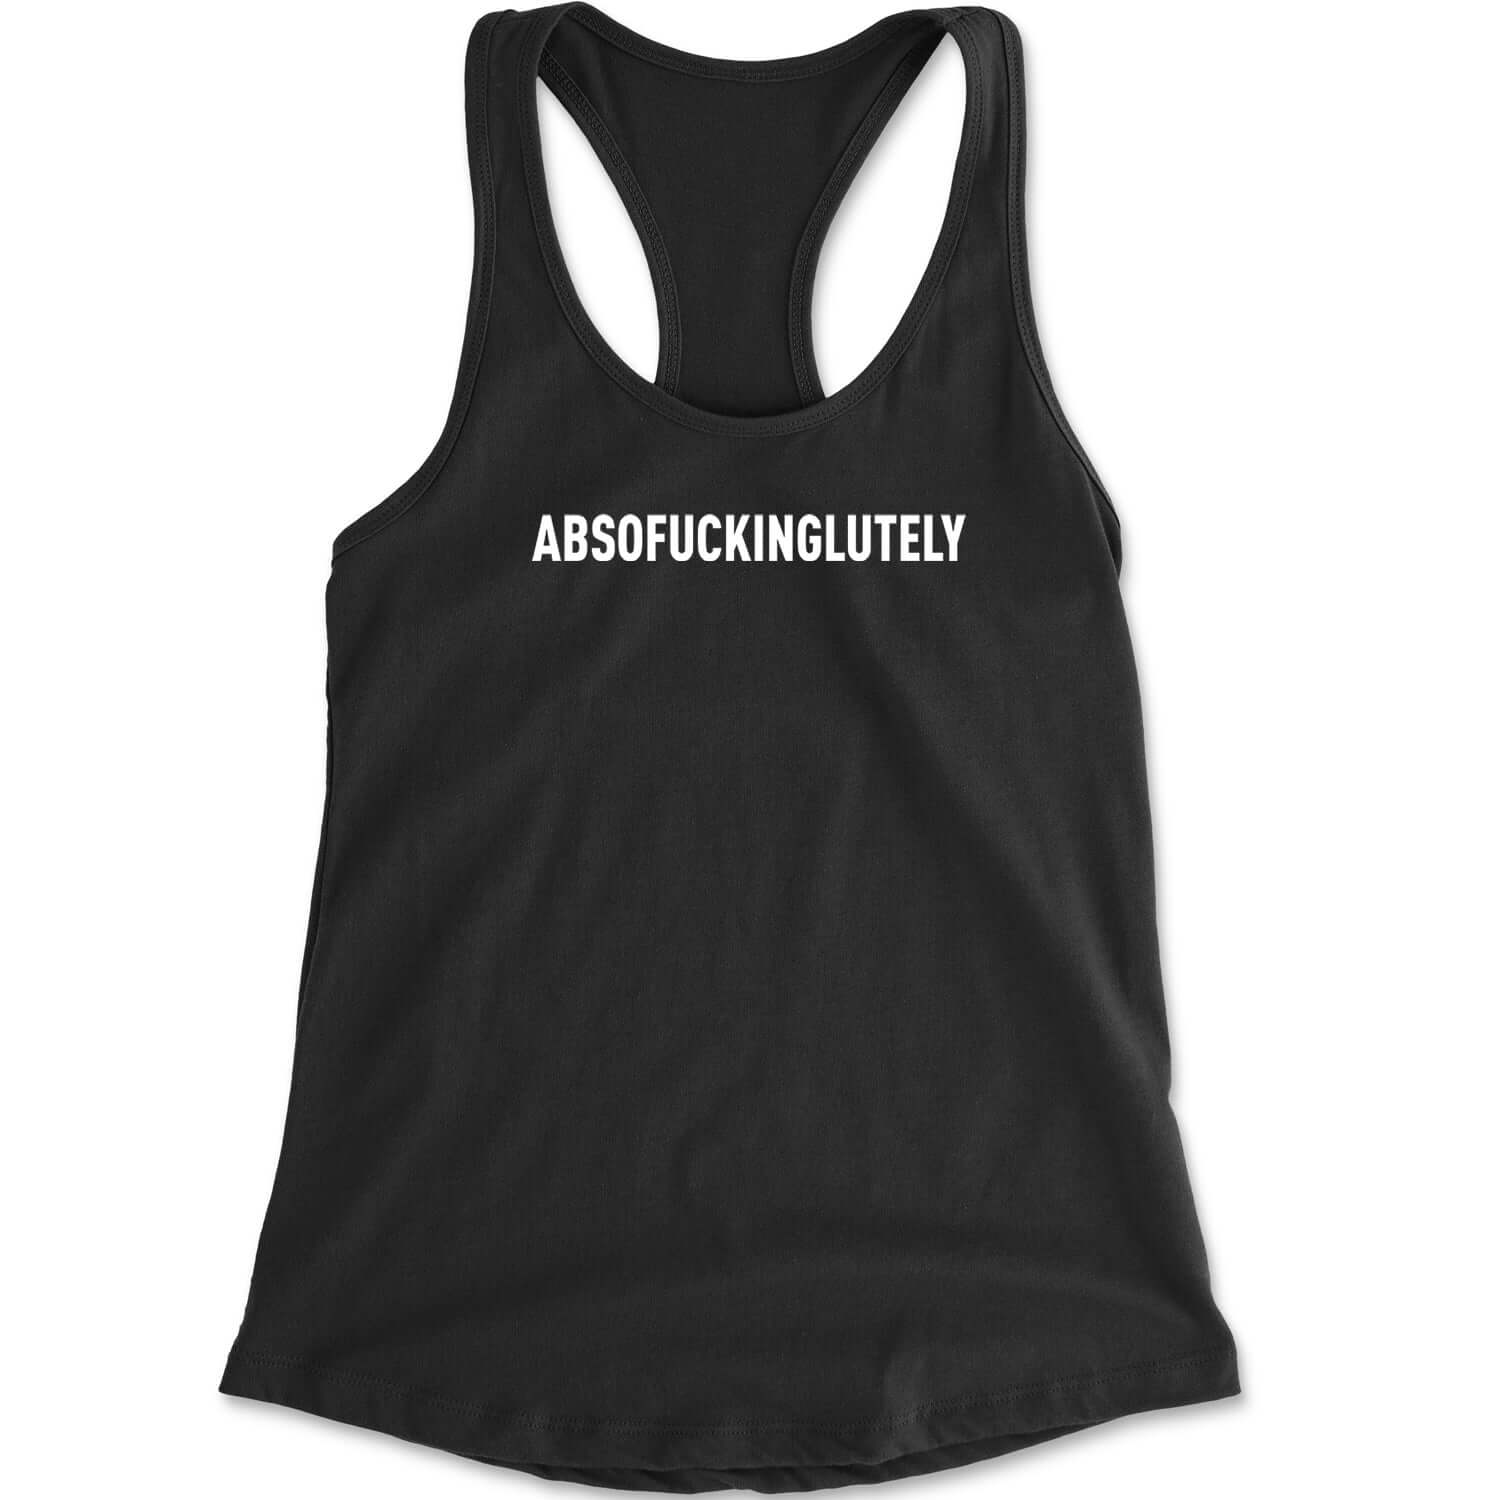 Abso f-cking lutely Racerback Tank Top for Women funny, shirt by Expression Tees